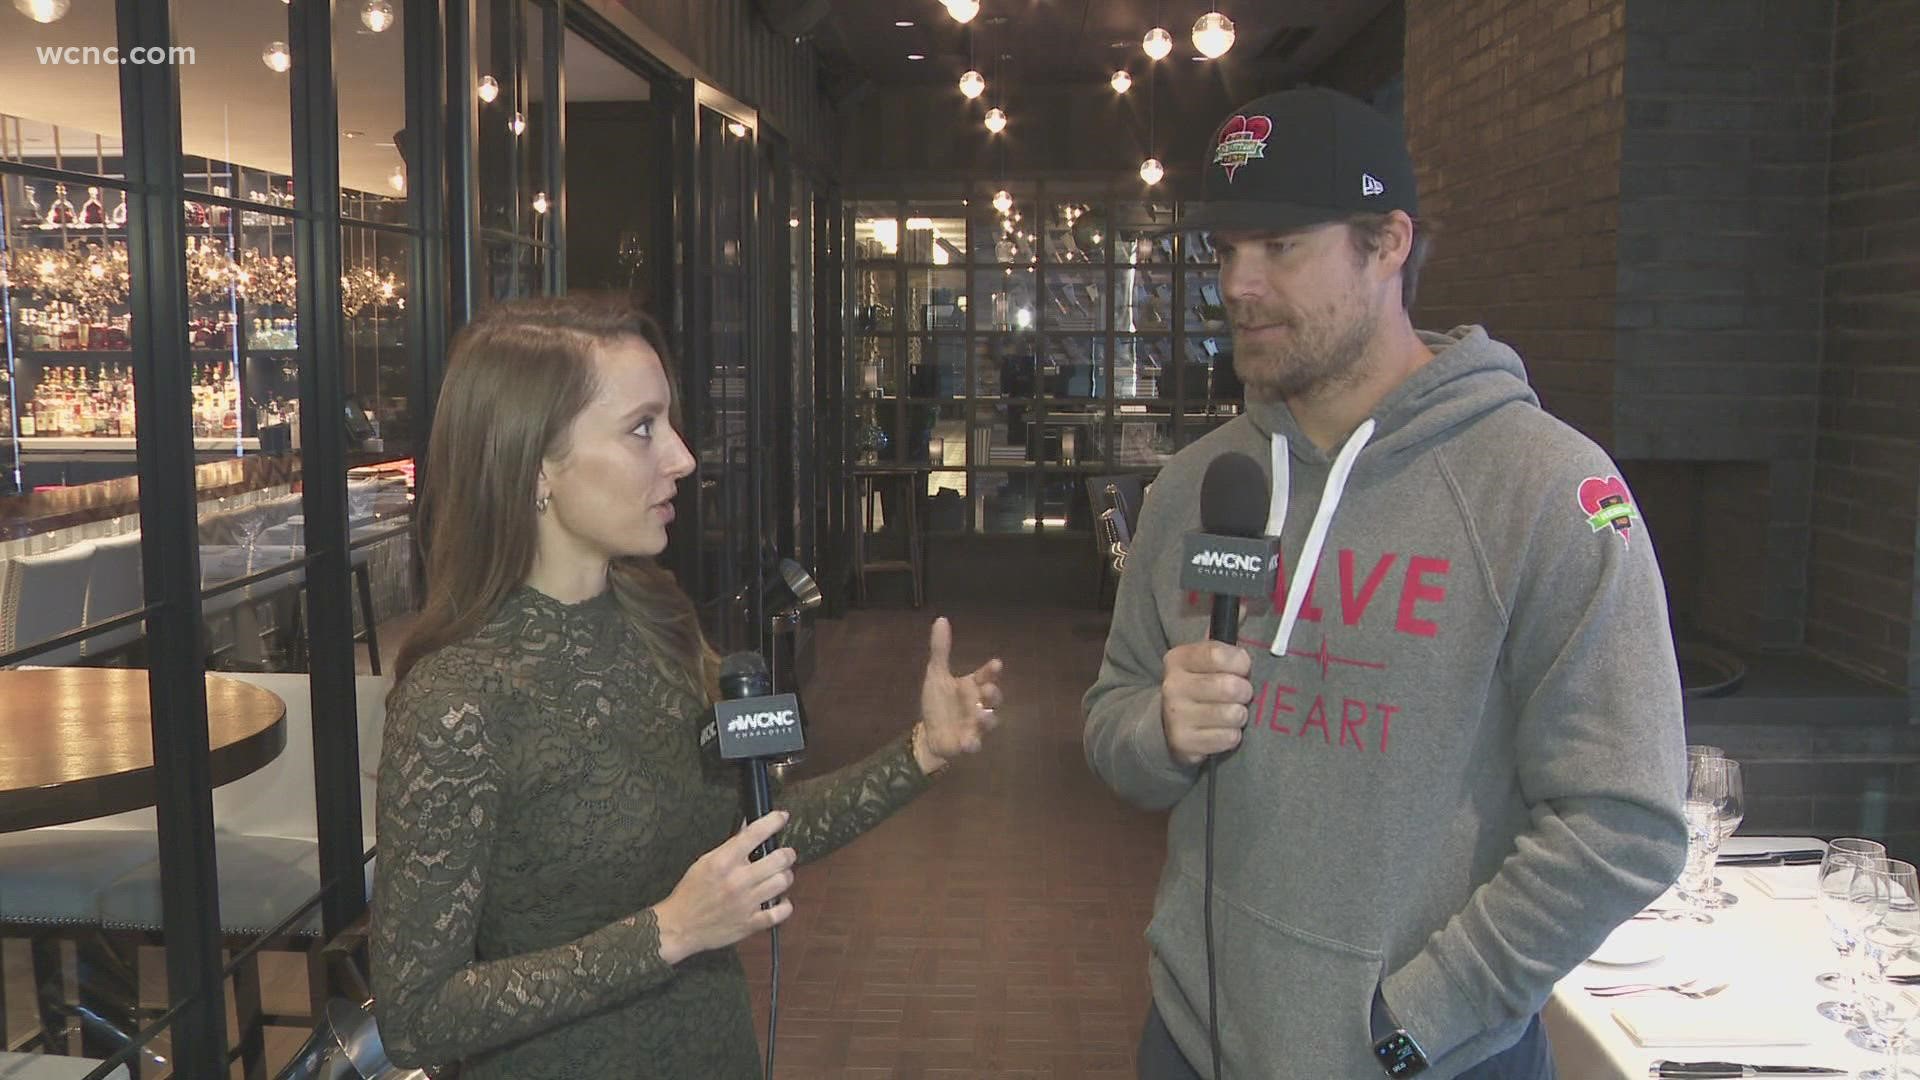 Panthers legend Greg Olsen spoke with WCNC Charlotte's Ashley Stroehlein about the foundation's upcoming event and what the Charlotte community means to him.